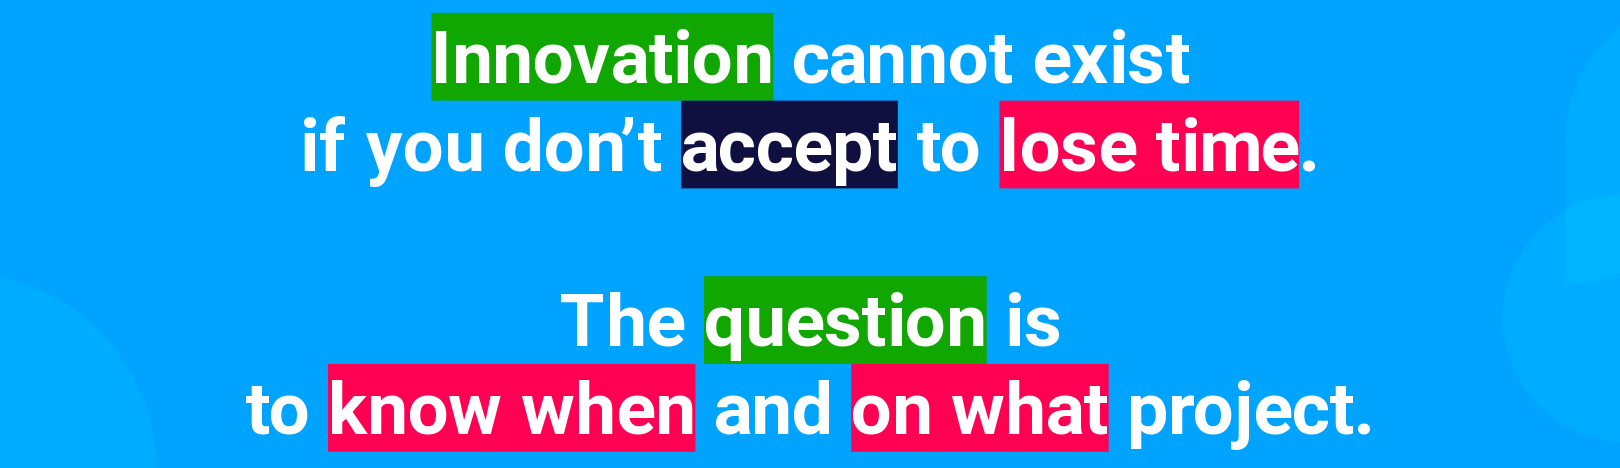 Innovation cannot exist if you don't accept to lose time. The question is to know when and on what project.